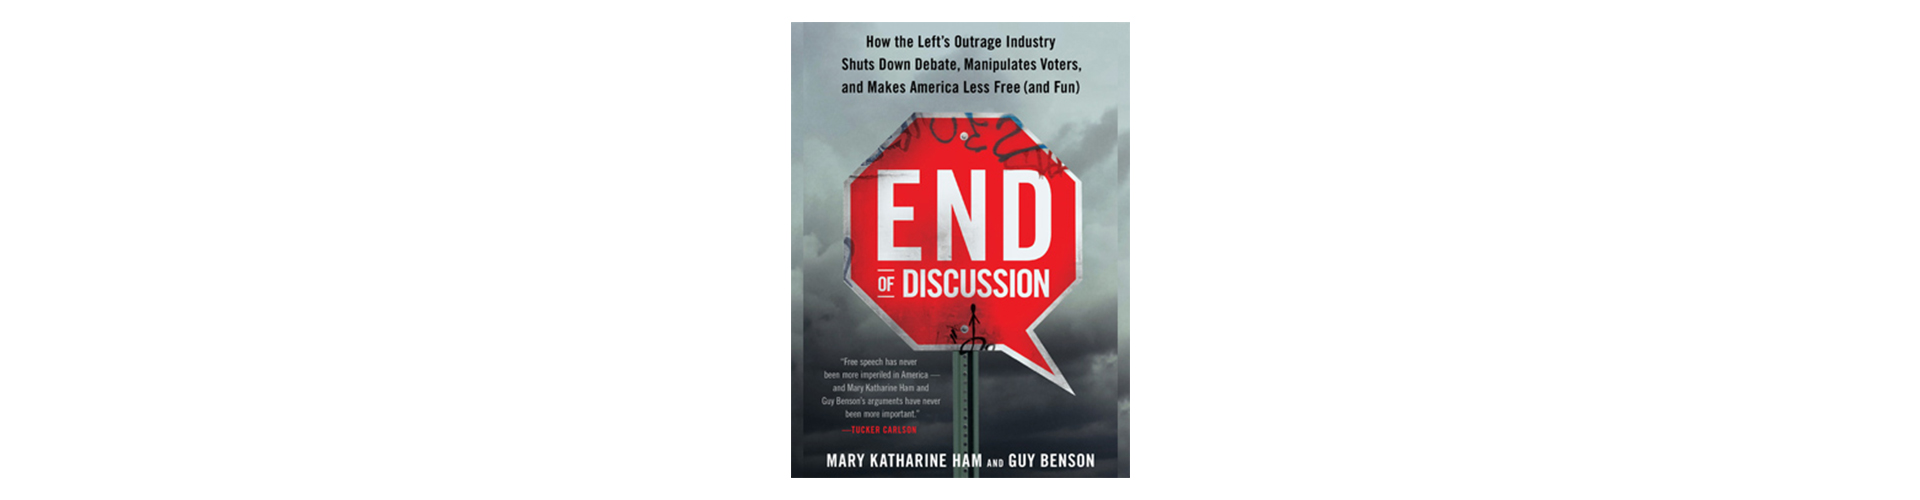 Cover art for "End of Discussion," the book  with Mary Katharine Ham in 2015.